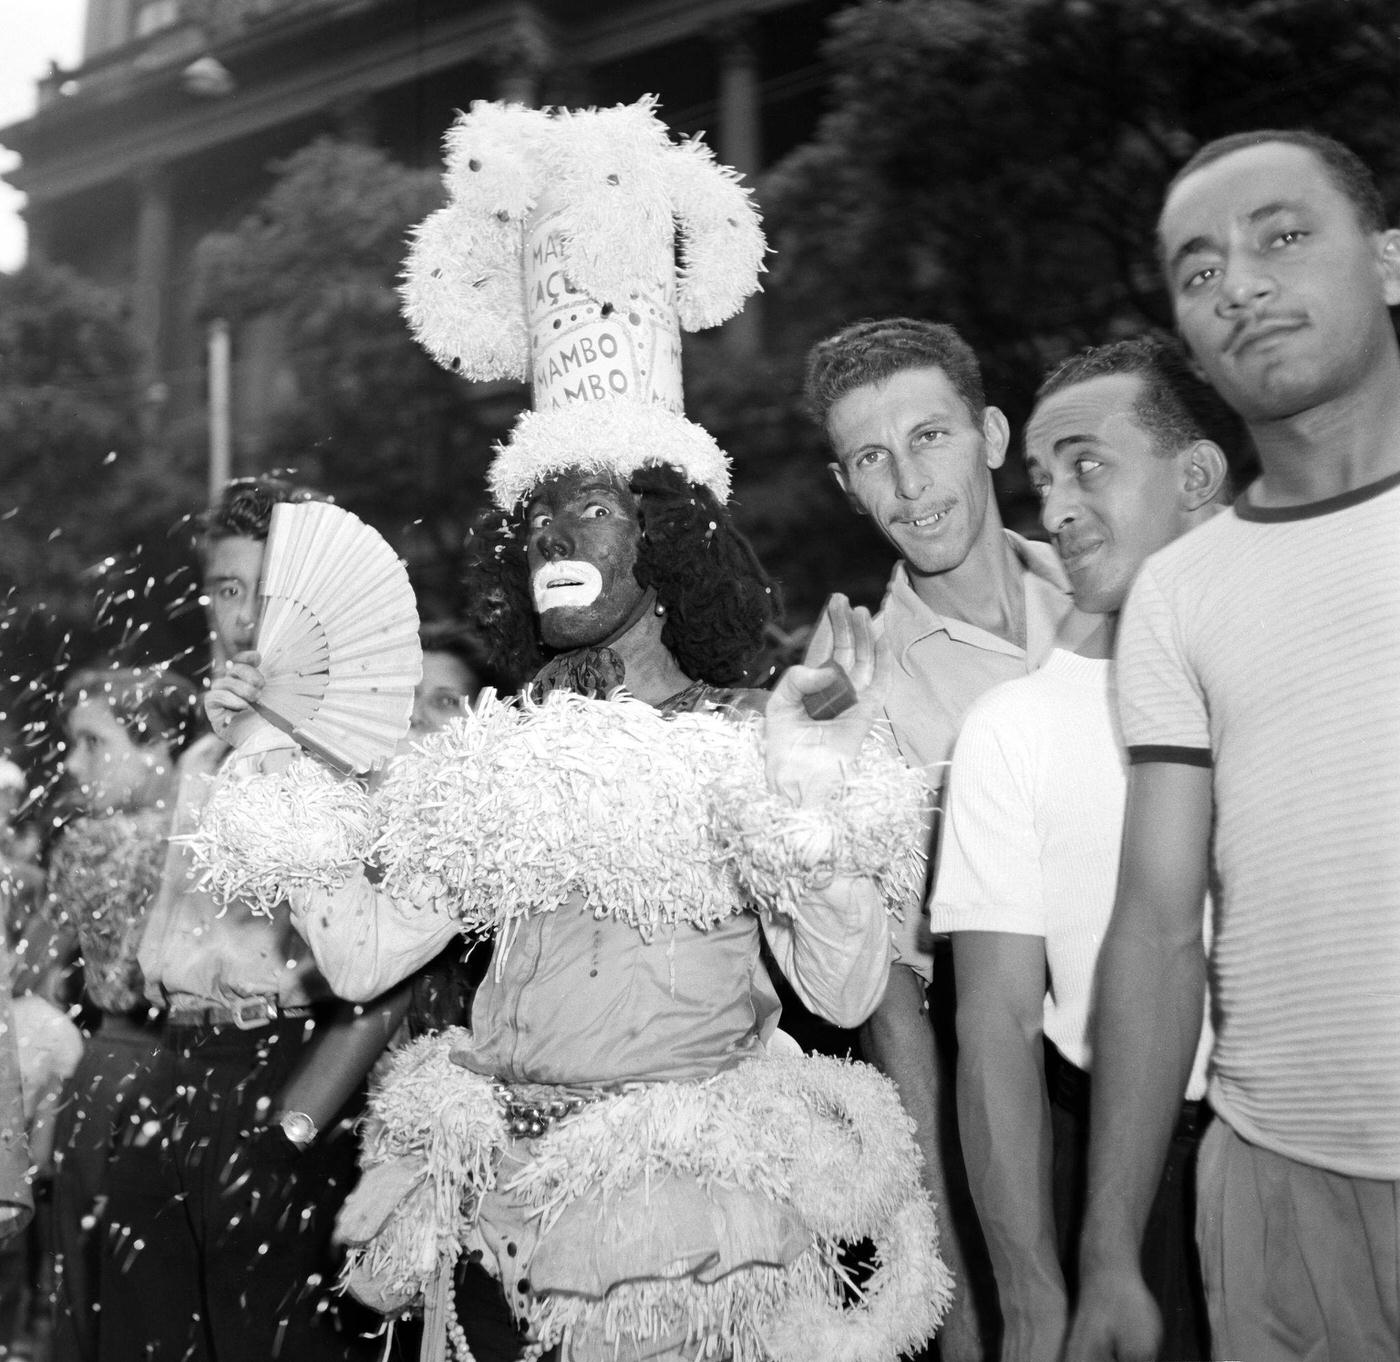 Costumed Partygoers, Carnival in Rio 1953